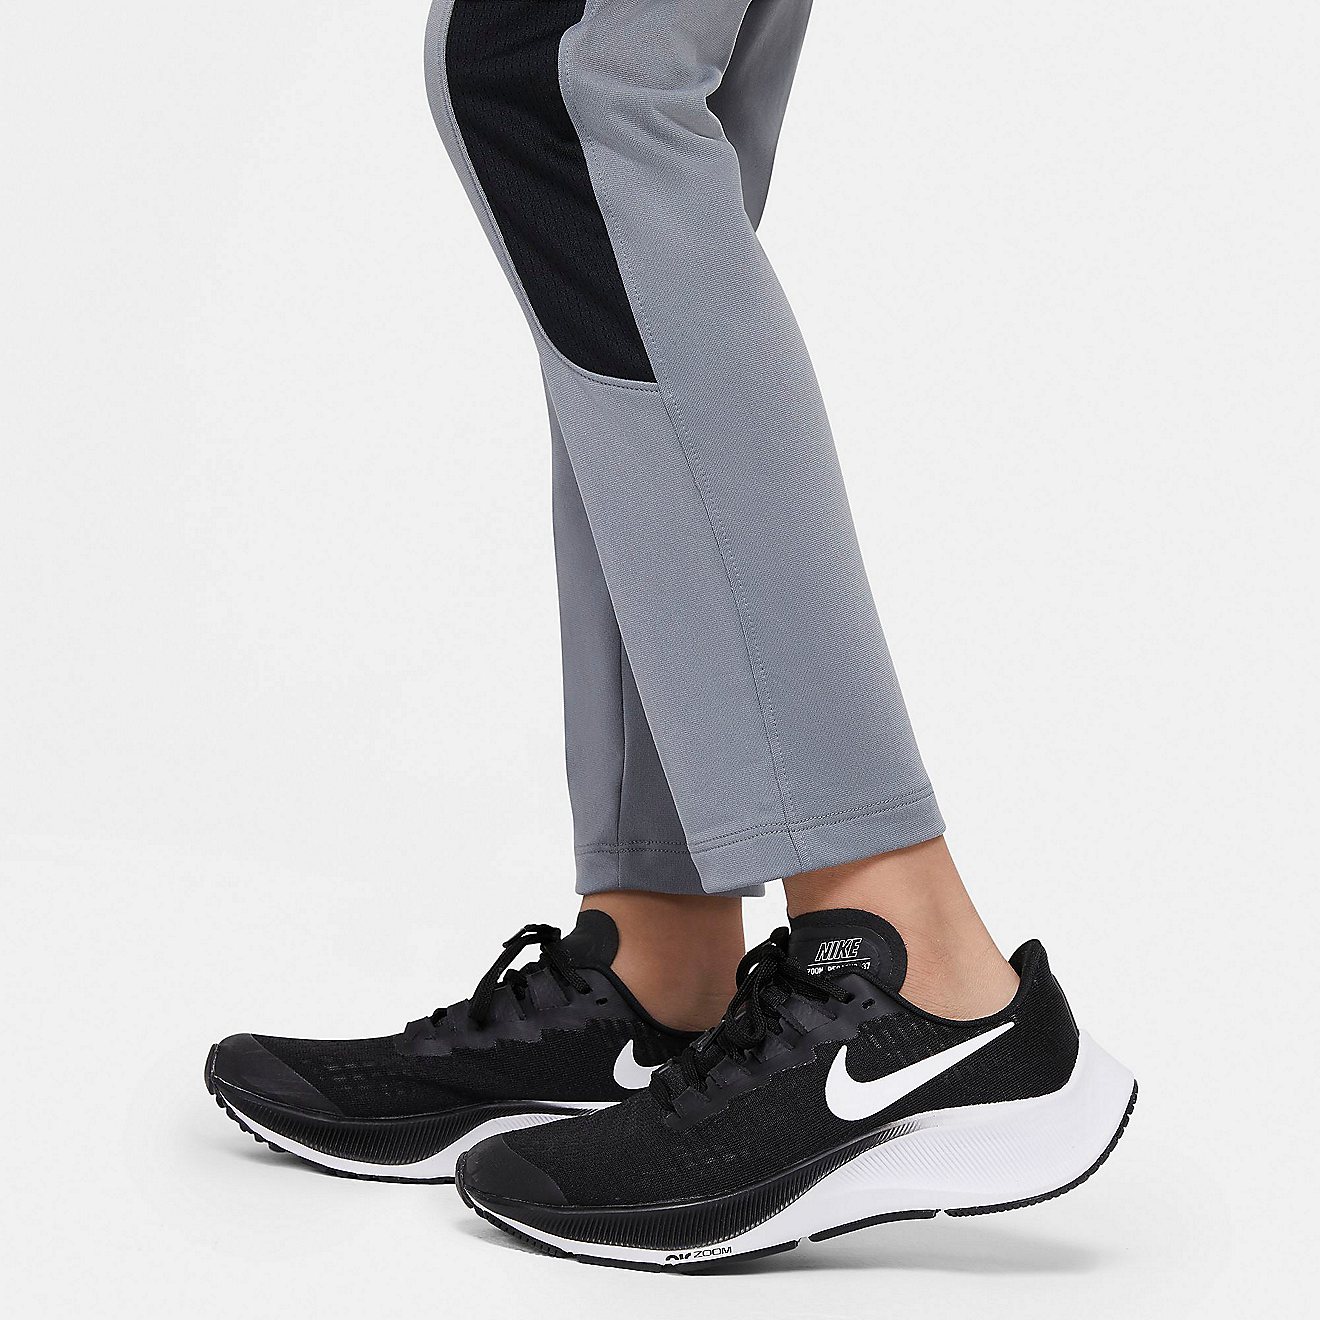 Nike Boys' Sport Poly Extended Sizing Pants | Academy